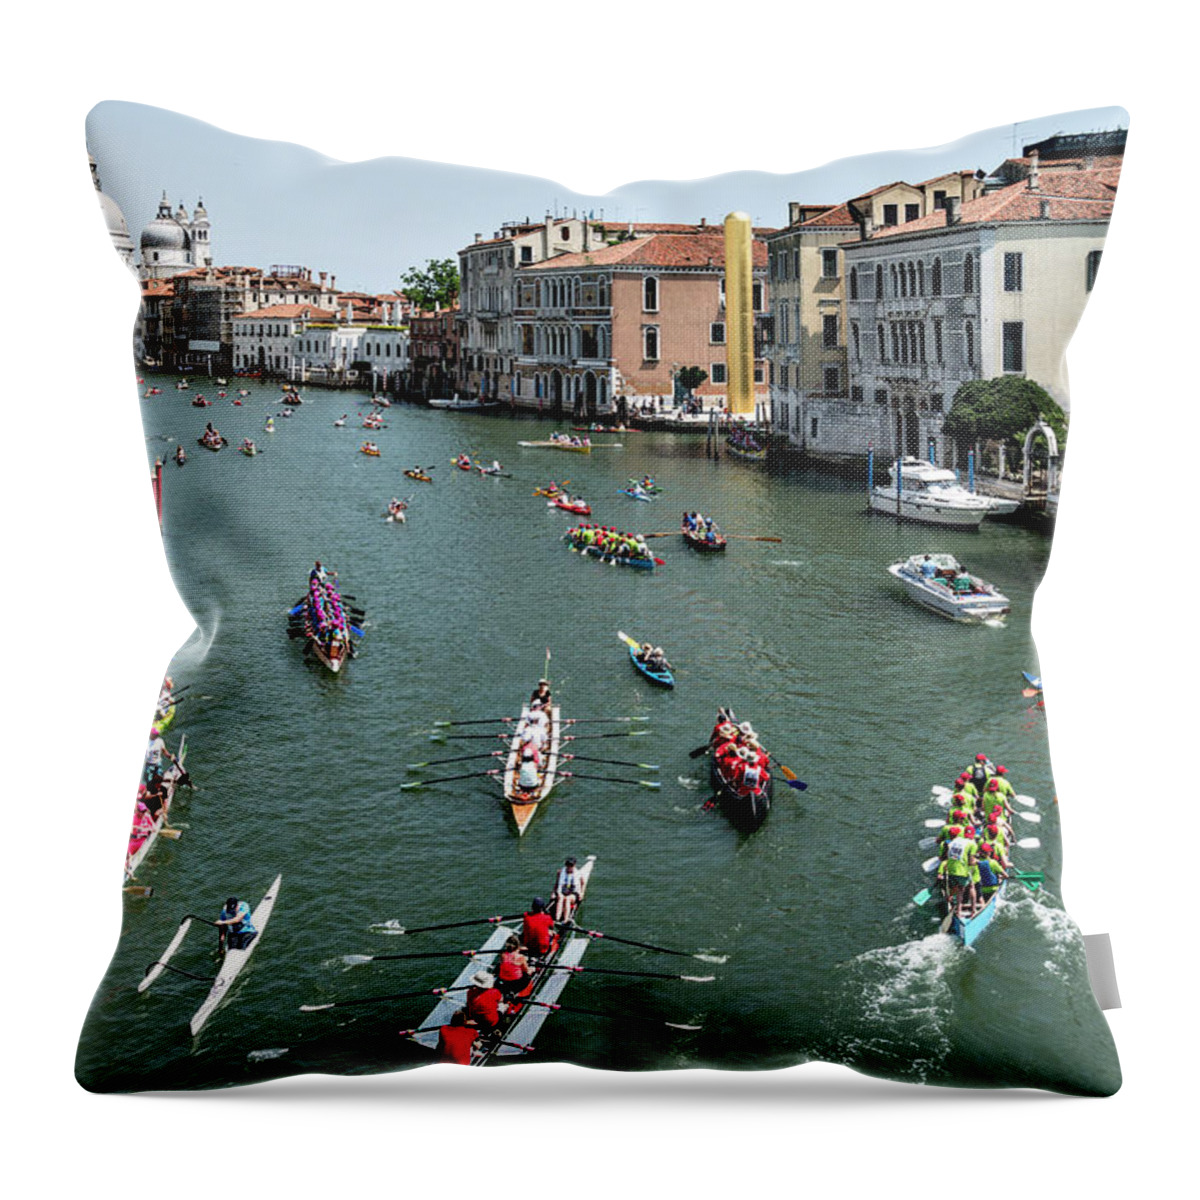 Italy Throw Pillow featuring the photograph Vogalonga Regatta Action by Alan Toepfer